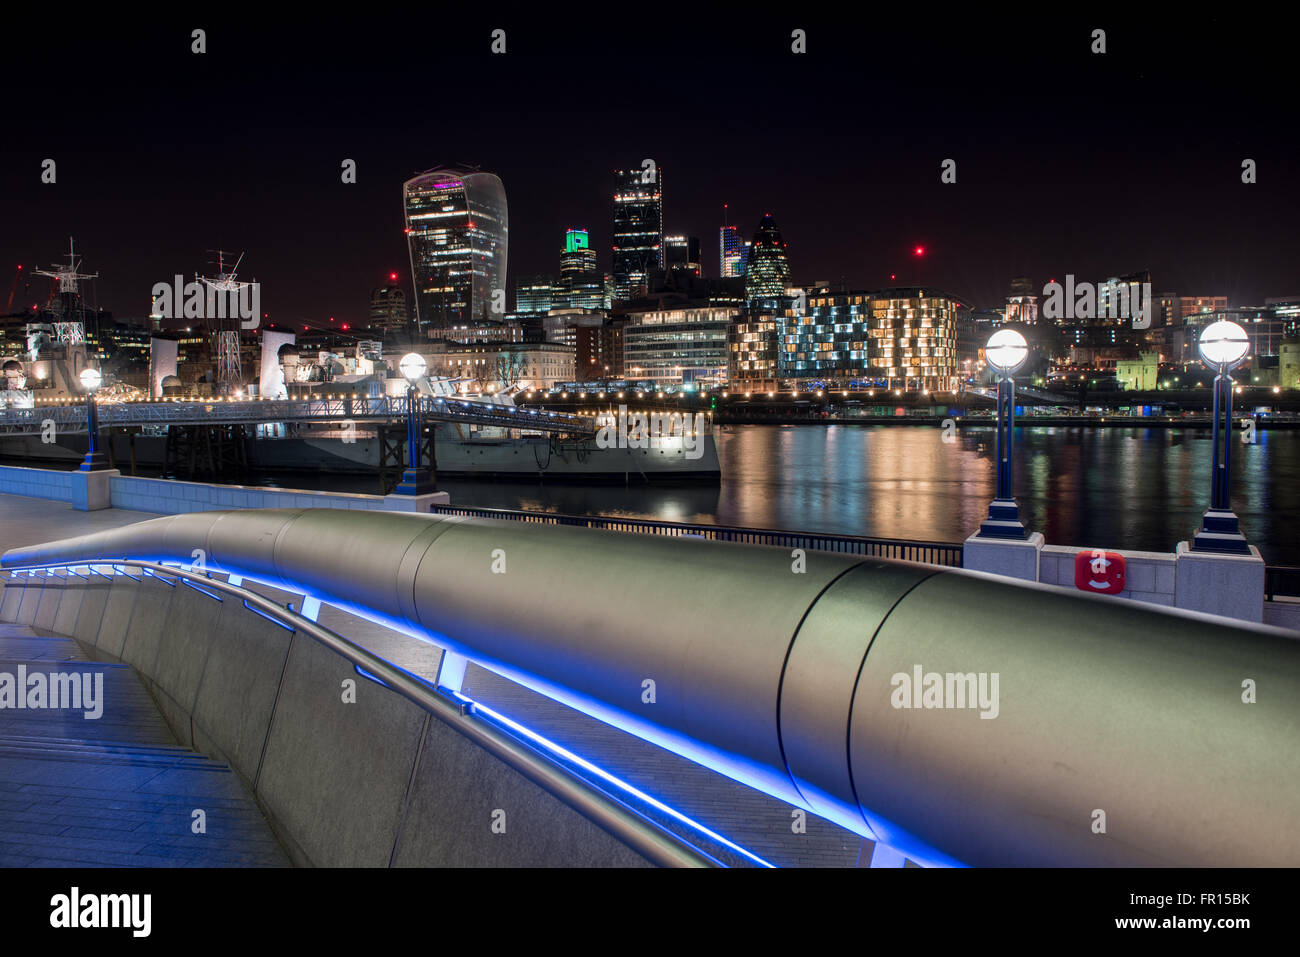 Panoramic view of River Thames and London Walkie Talkie, Gherkin and other skyscrapers, UK. Stock Photo